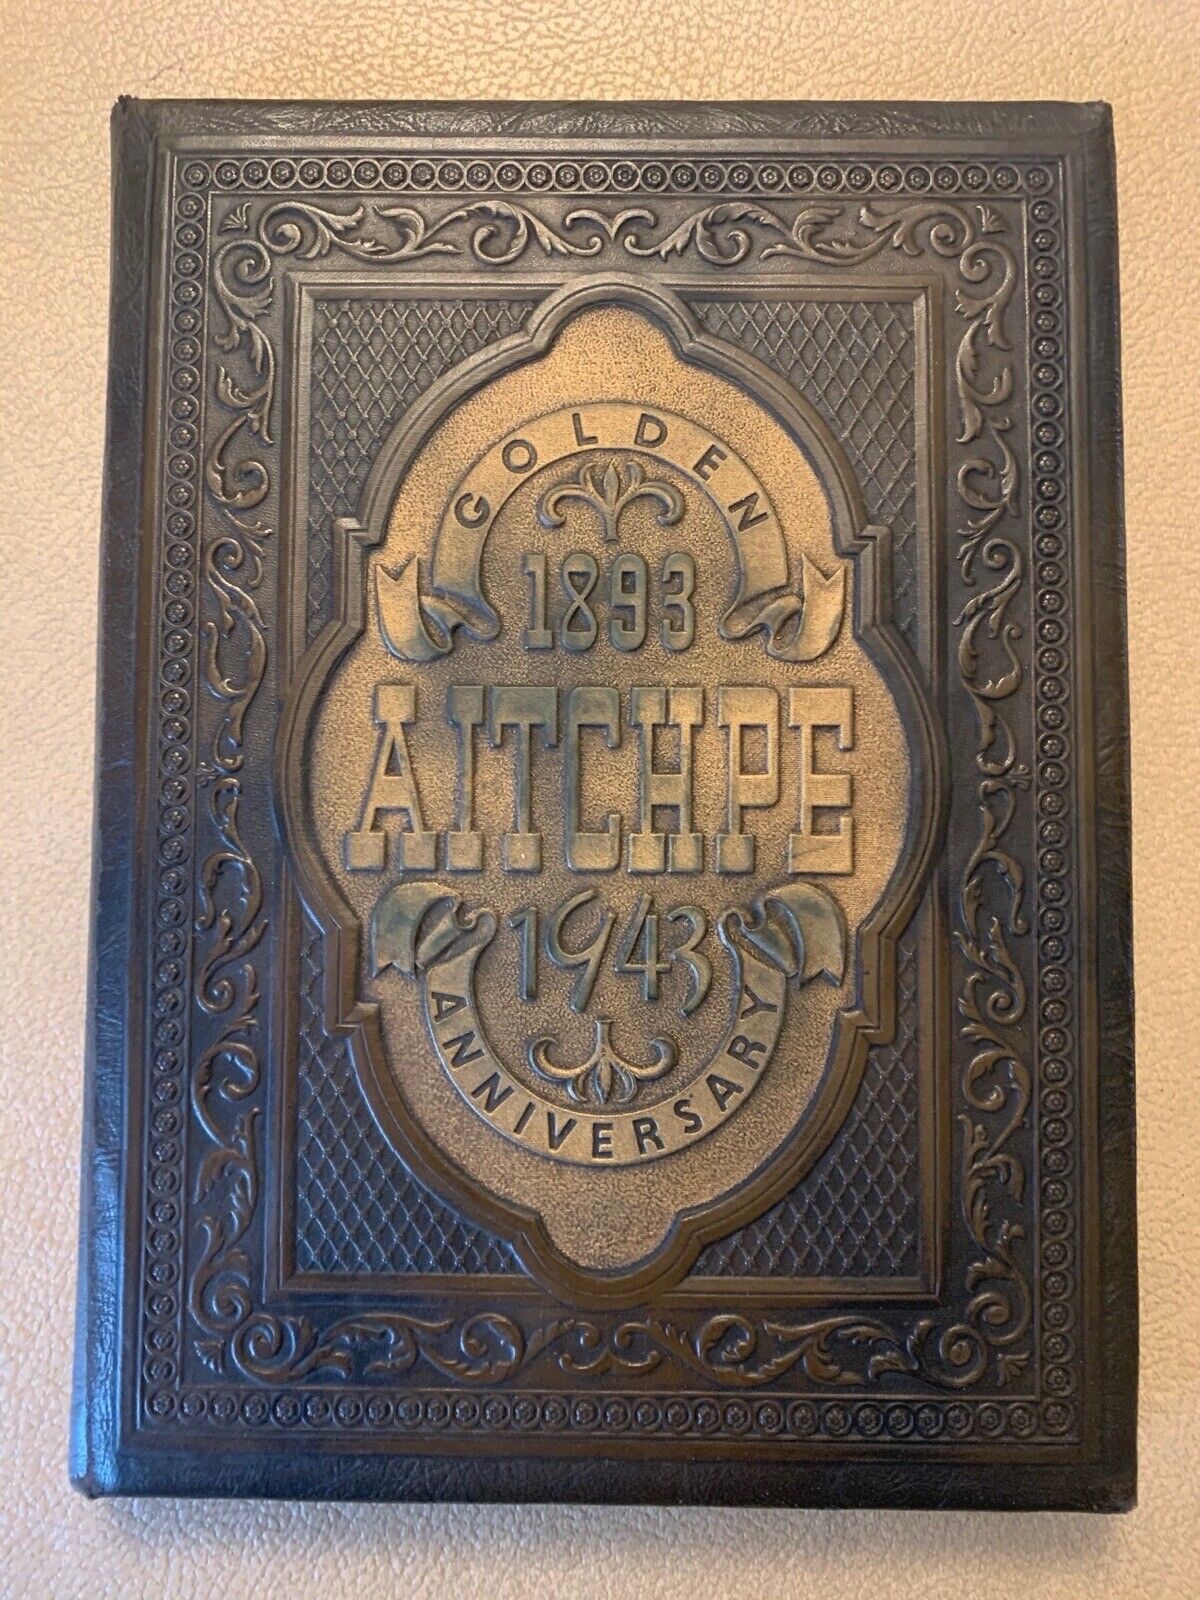 AITCHPE YEARBOOKS Set Of 4, 1943-46 HYDE PARK HIGH SCHOOL Chicago, IL